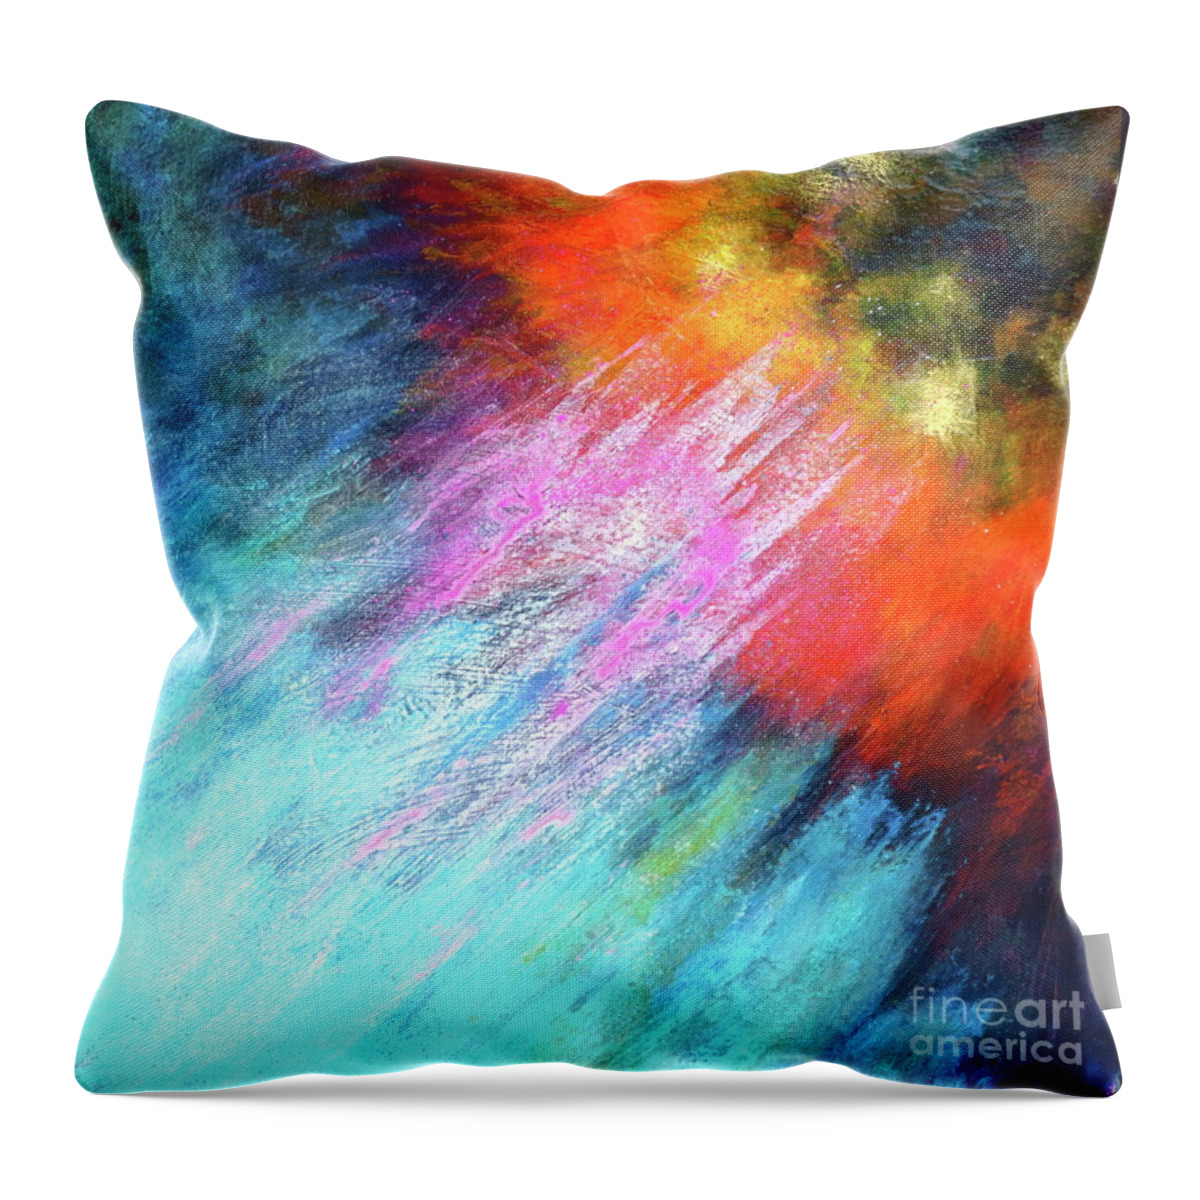 Title: Solar Vibrations. Fantasies In Space. A Series Of Acrylic Paintings On Canvas. Throw Pillow featuring the painting Solar Vibrations. acrylic abstract painting by Robert Birkenes